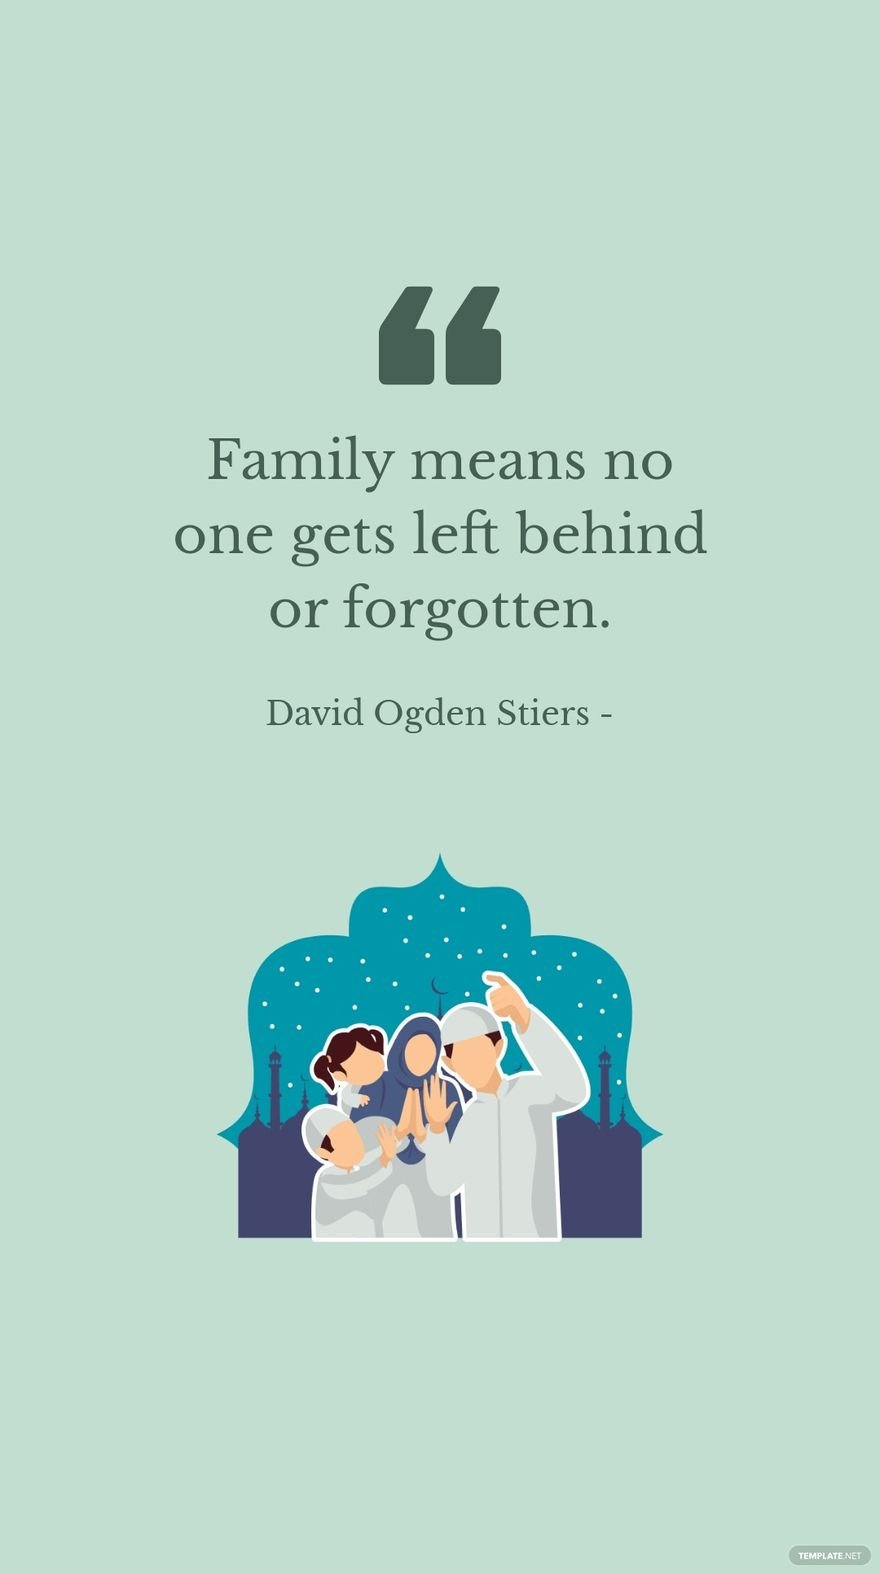 David Ogden Stiers - Family means no one gets left behind or forgotten.